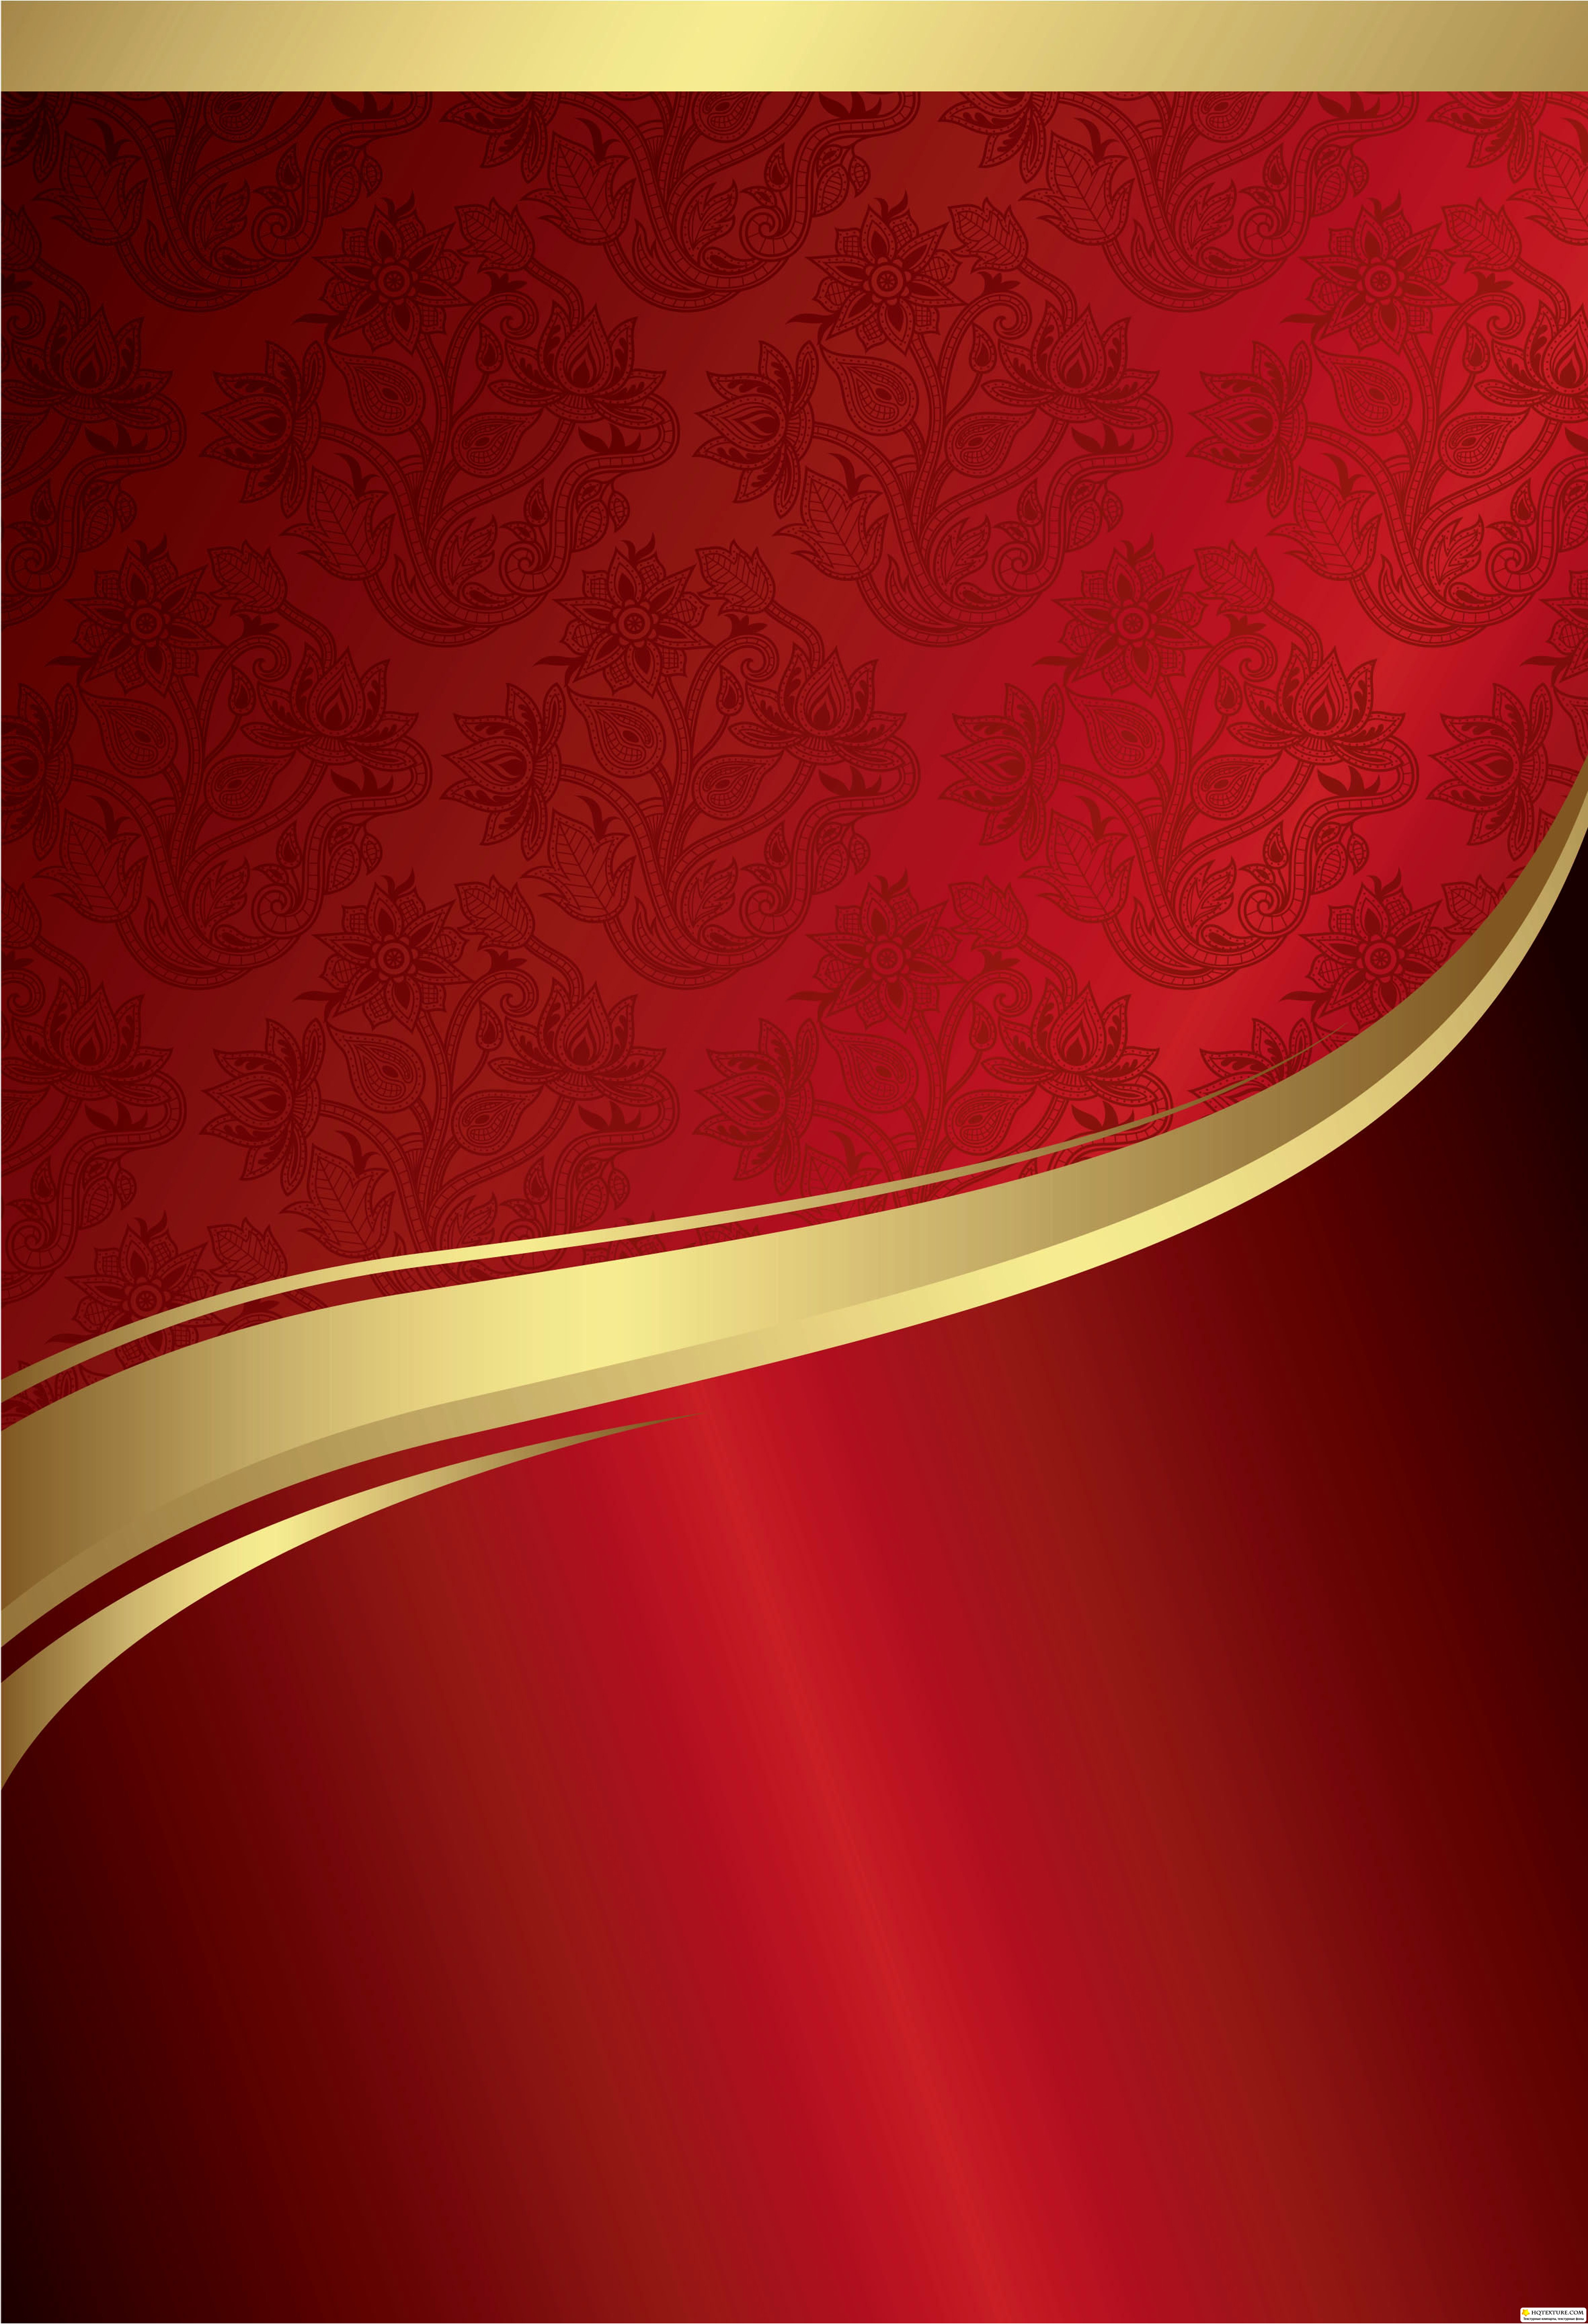 🔥 Download Stock Gold And Red Floral Royal Background by @brookeharris